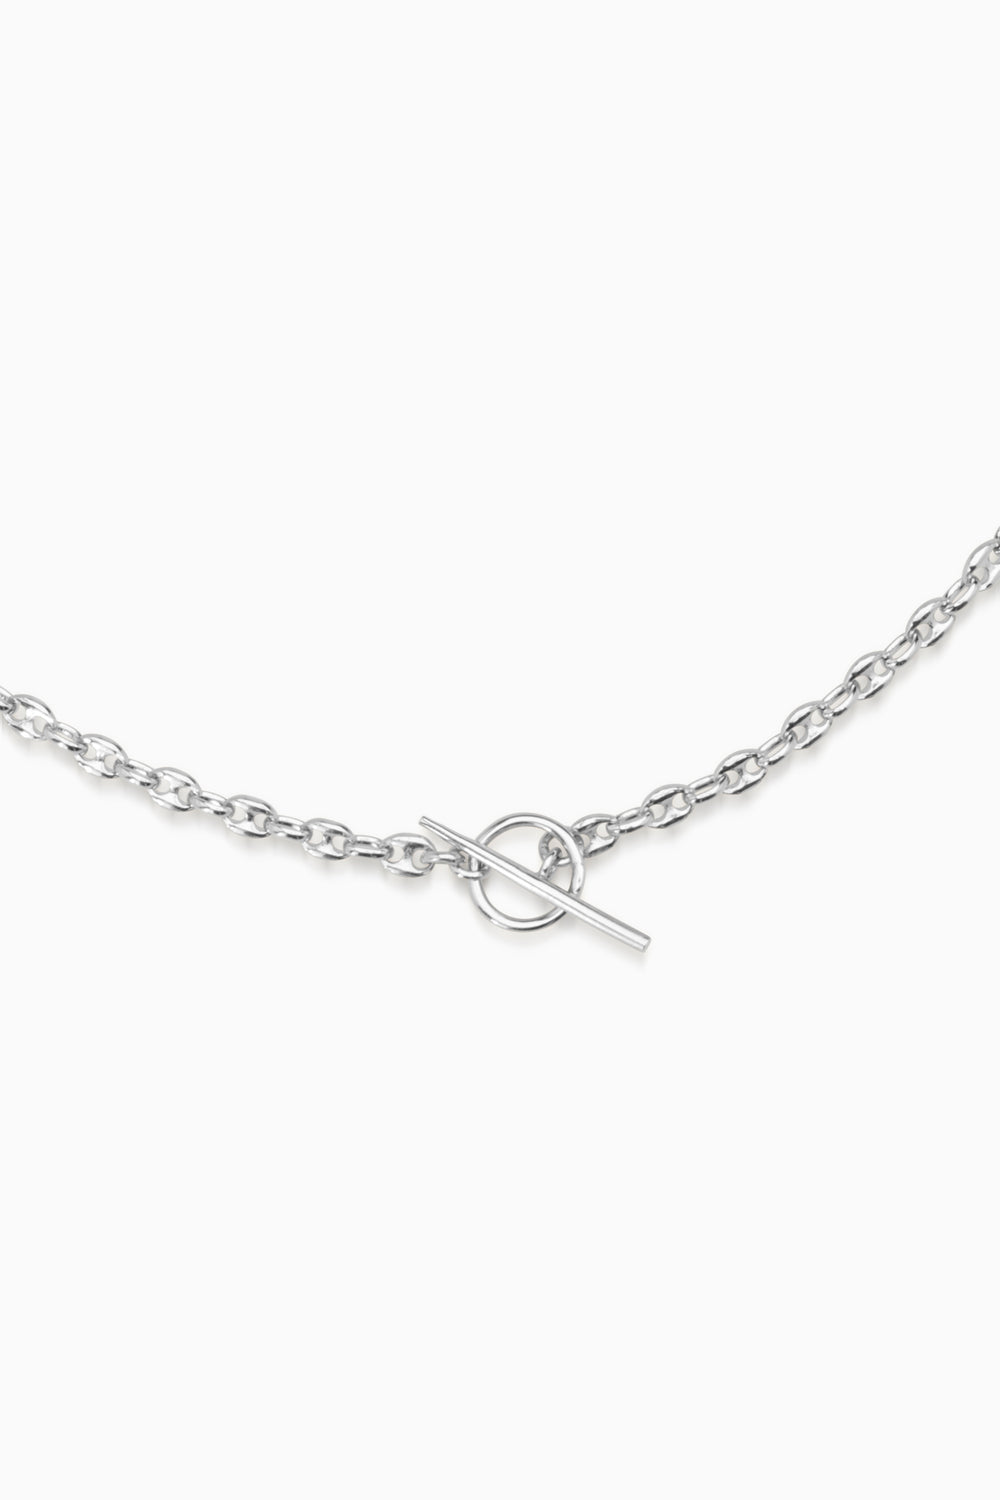 Spear Fob Necklace | Silver